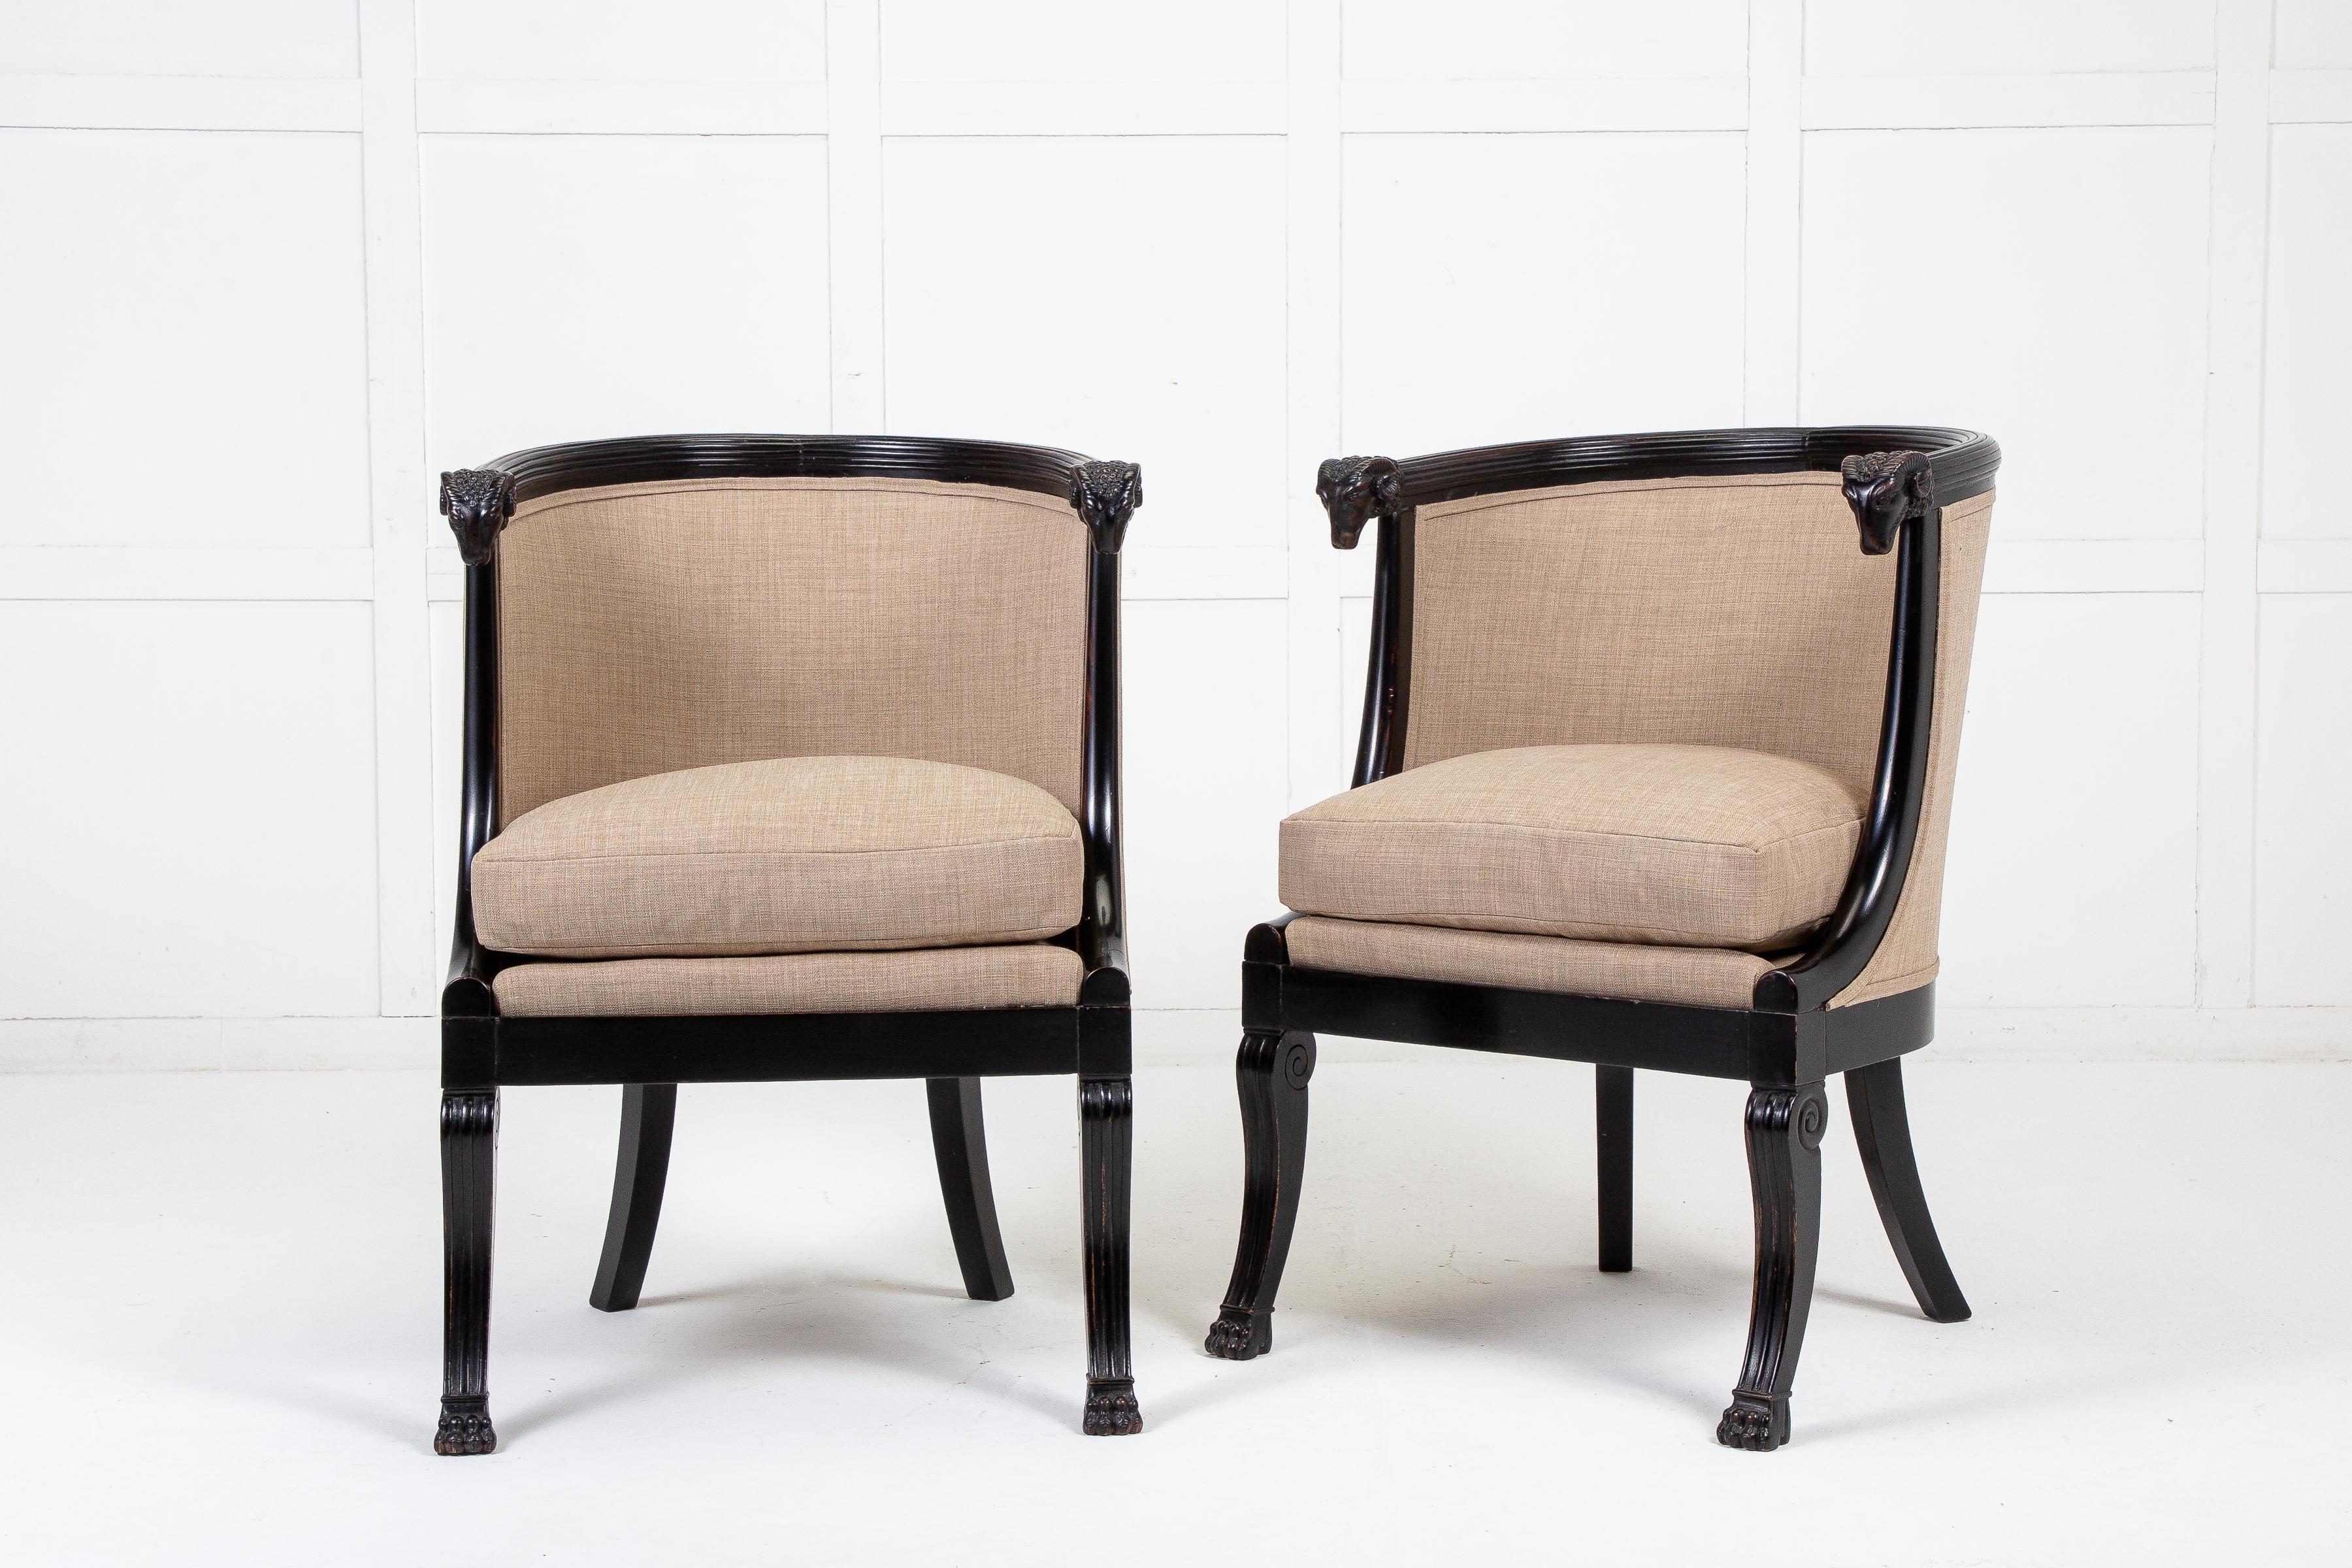 An impressive pair of 19th century French, ebonised chairs, with reeded semi circular shaped, barrel backs. Having solid carved wood frames, featuring ram's head carvings to the front supports. Deep, fully stuffed seat cushions make them